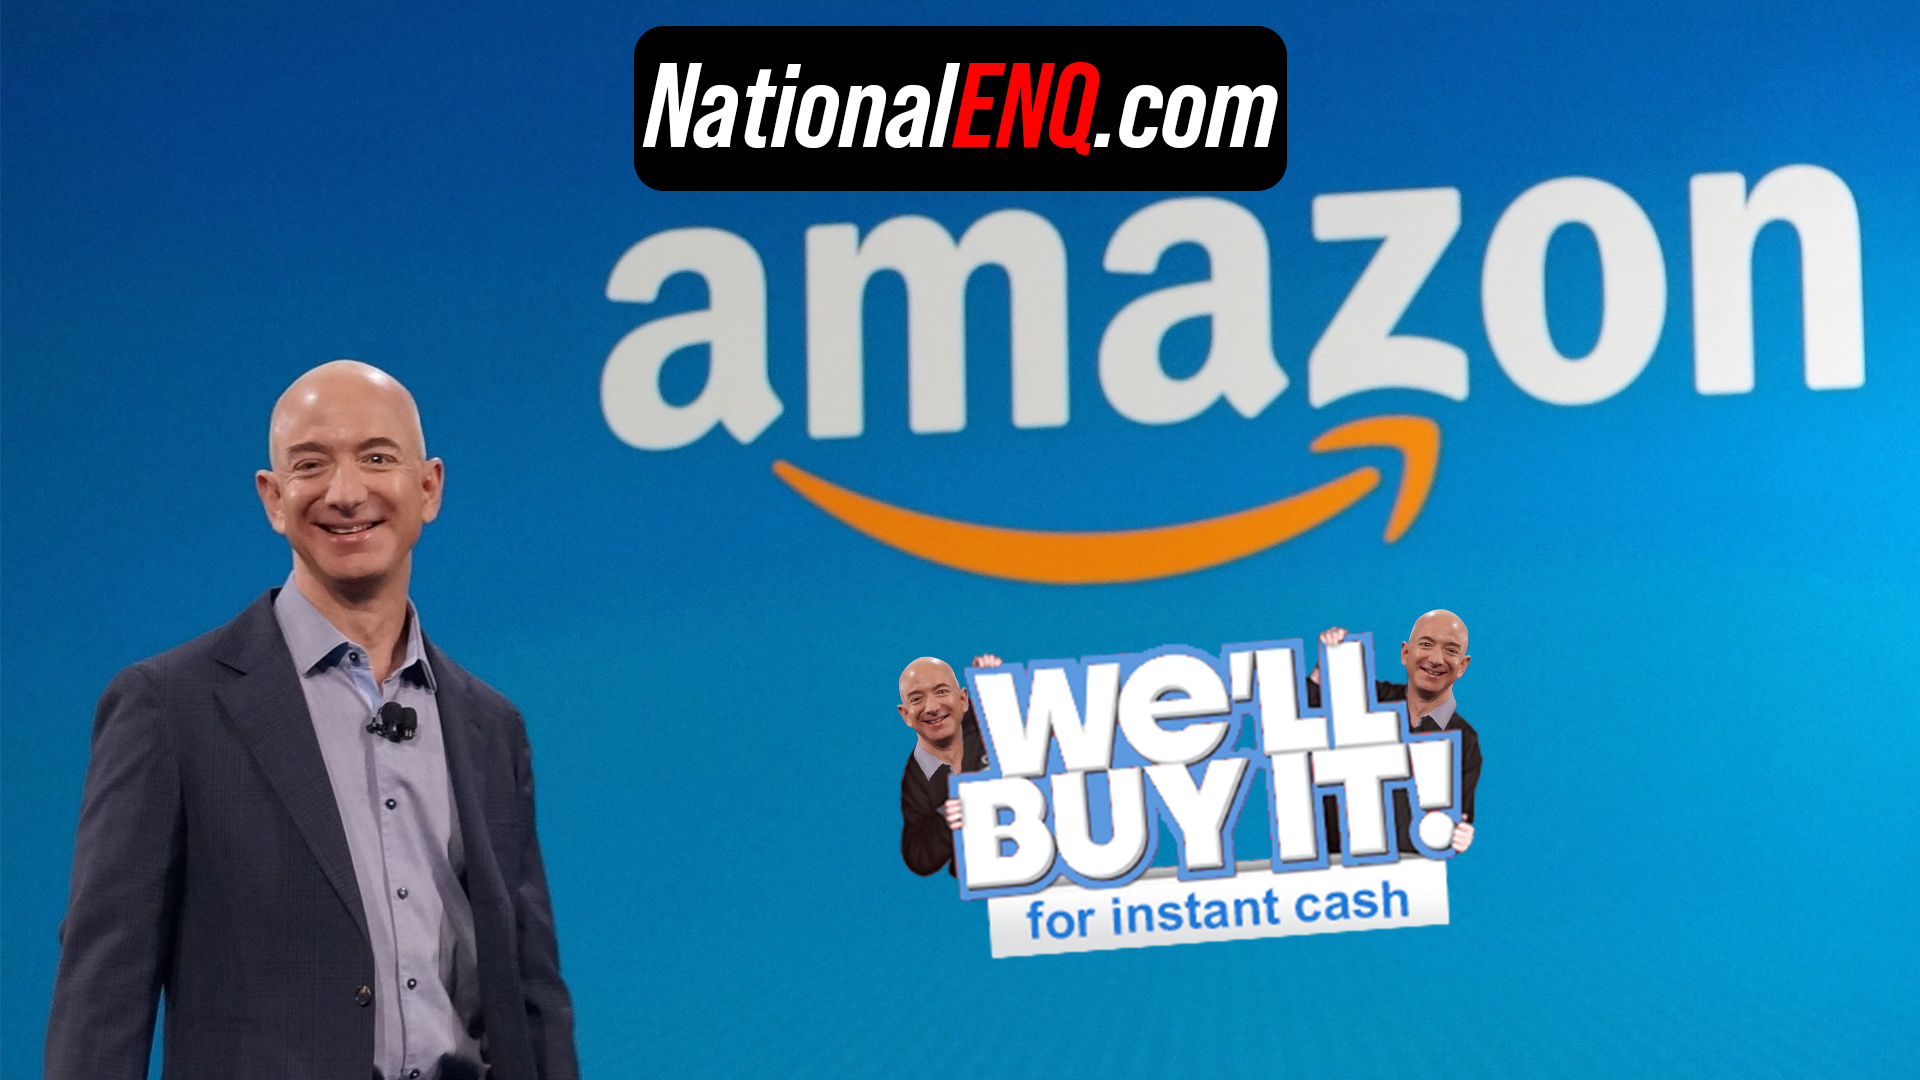 National ENQ News: Report Says Amazon Could Be Interested In American Export Import – AmericanExportImport.com Acquisition